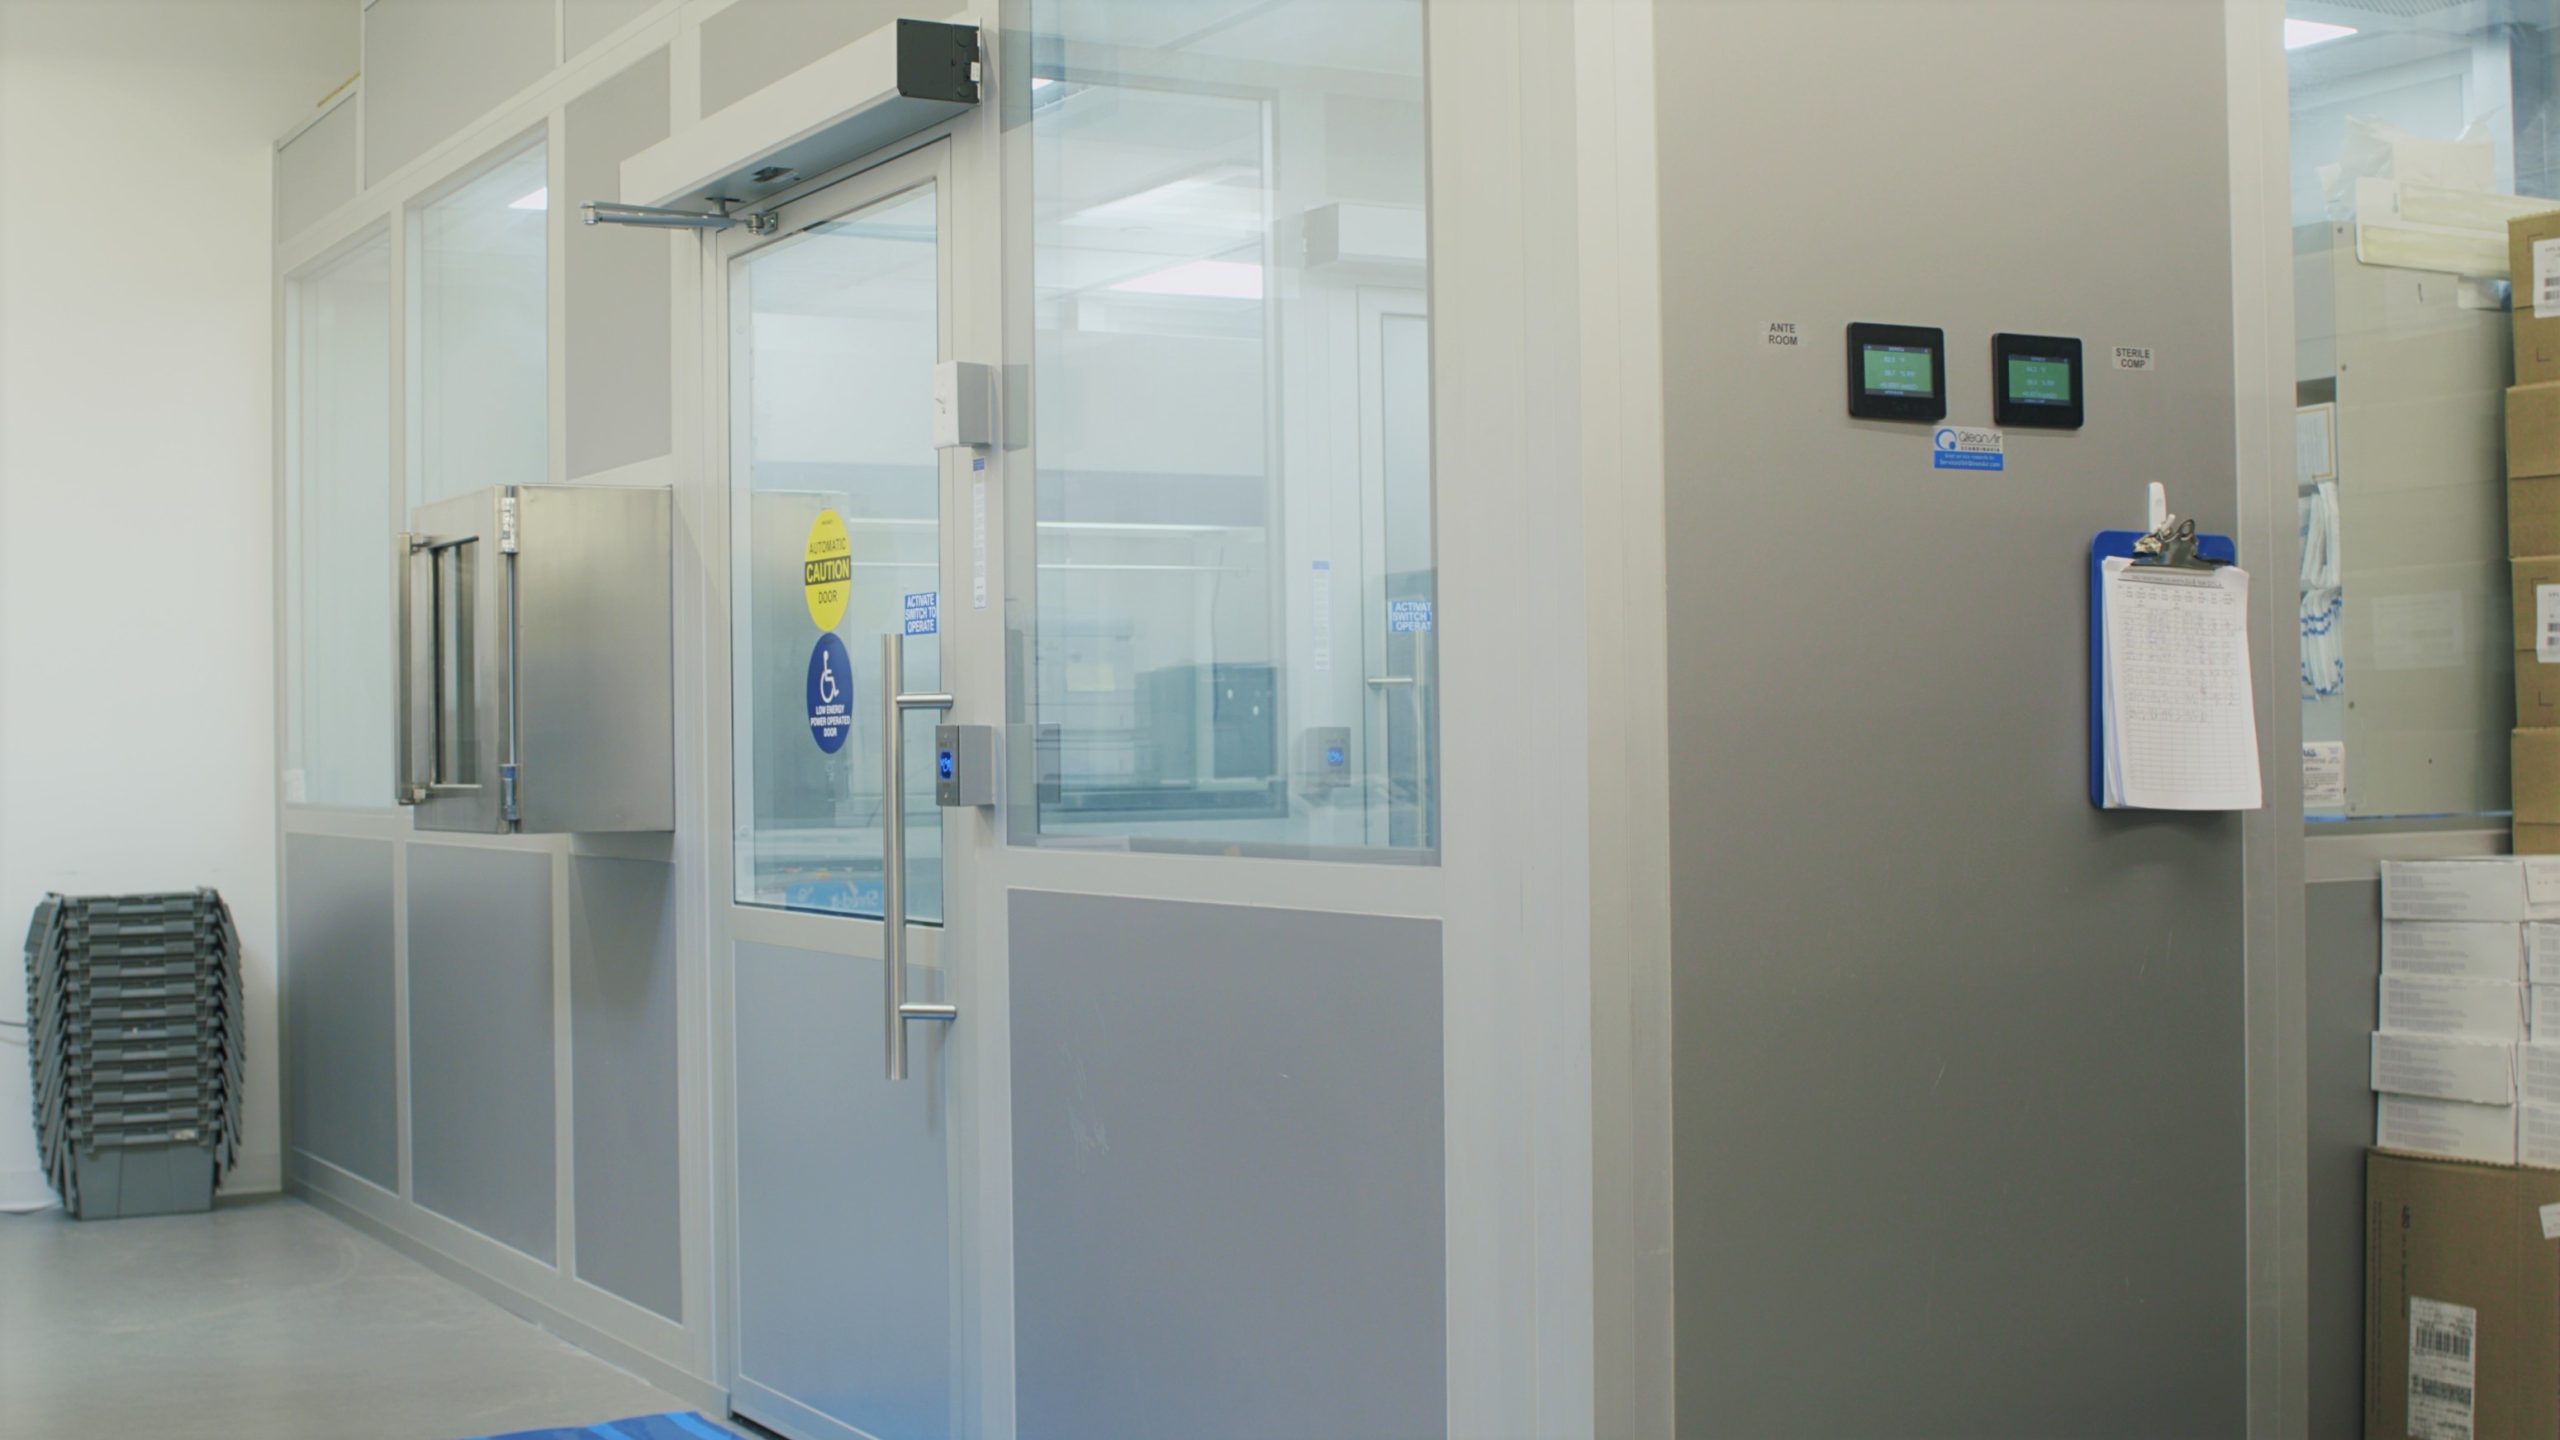 Absolute Pharmacy upgrades to a cleanroom from QleanAir